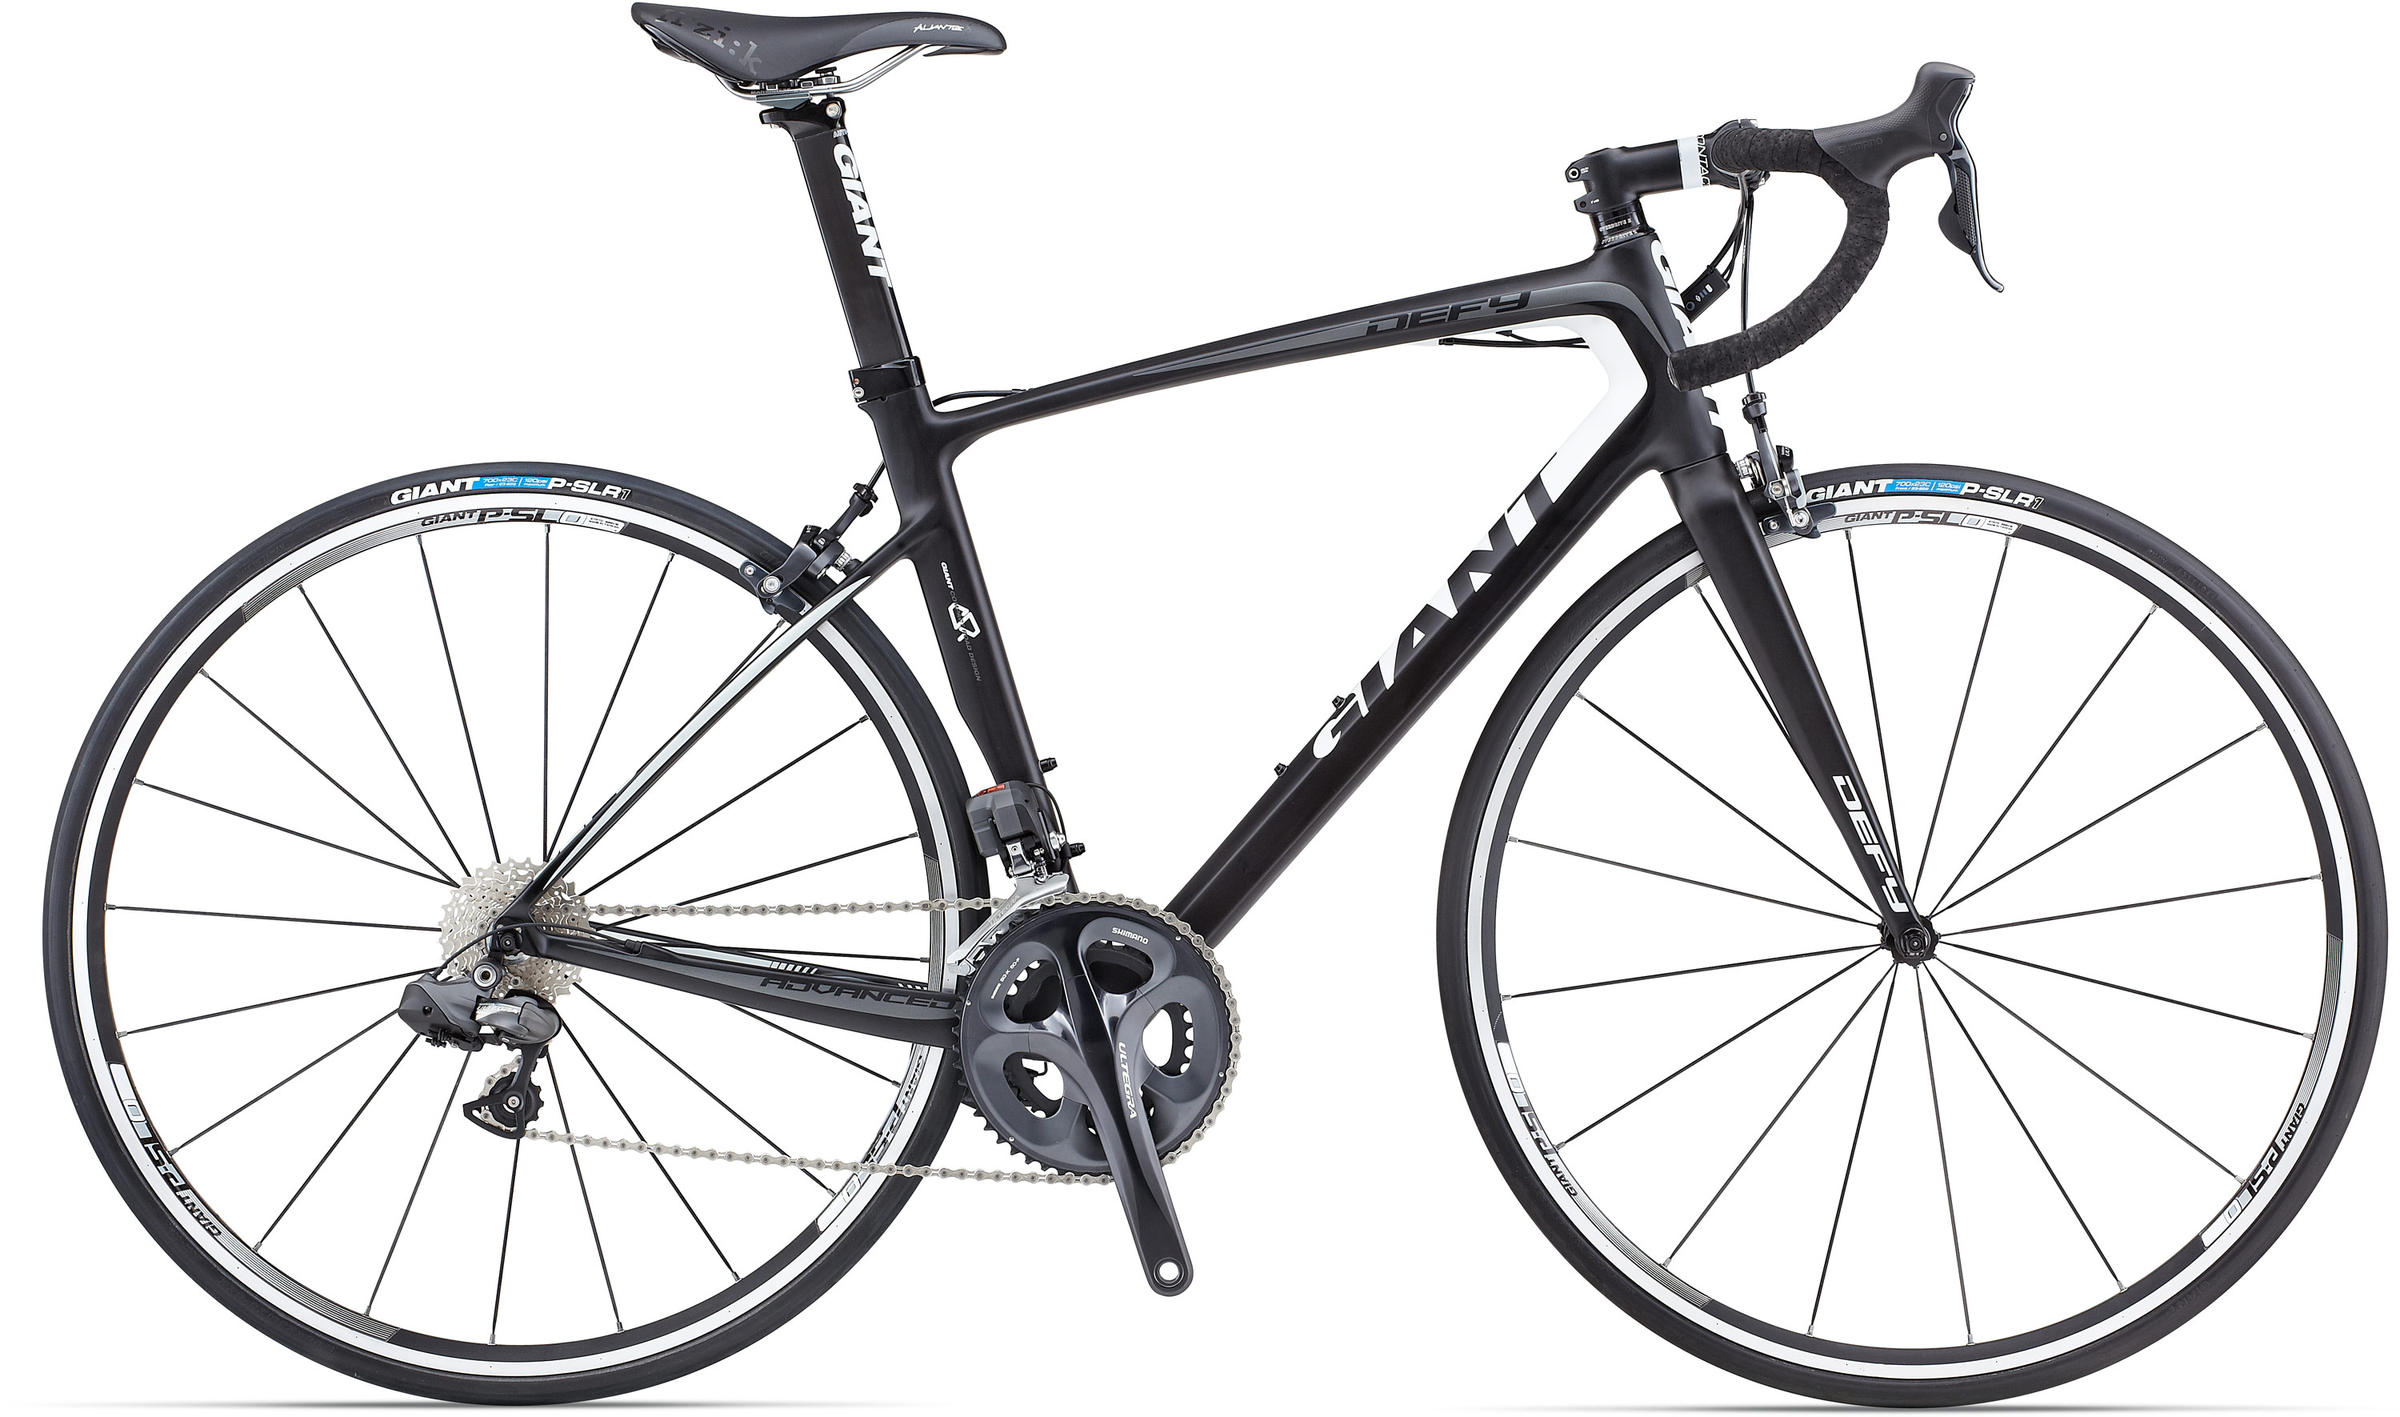 13 Giant Defy Advanced 0 Bicycle Details Bicyclebluebook Com